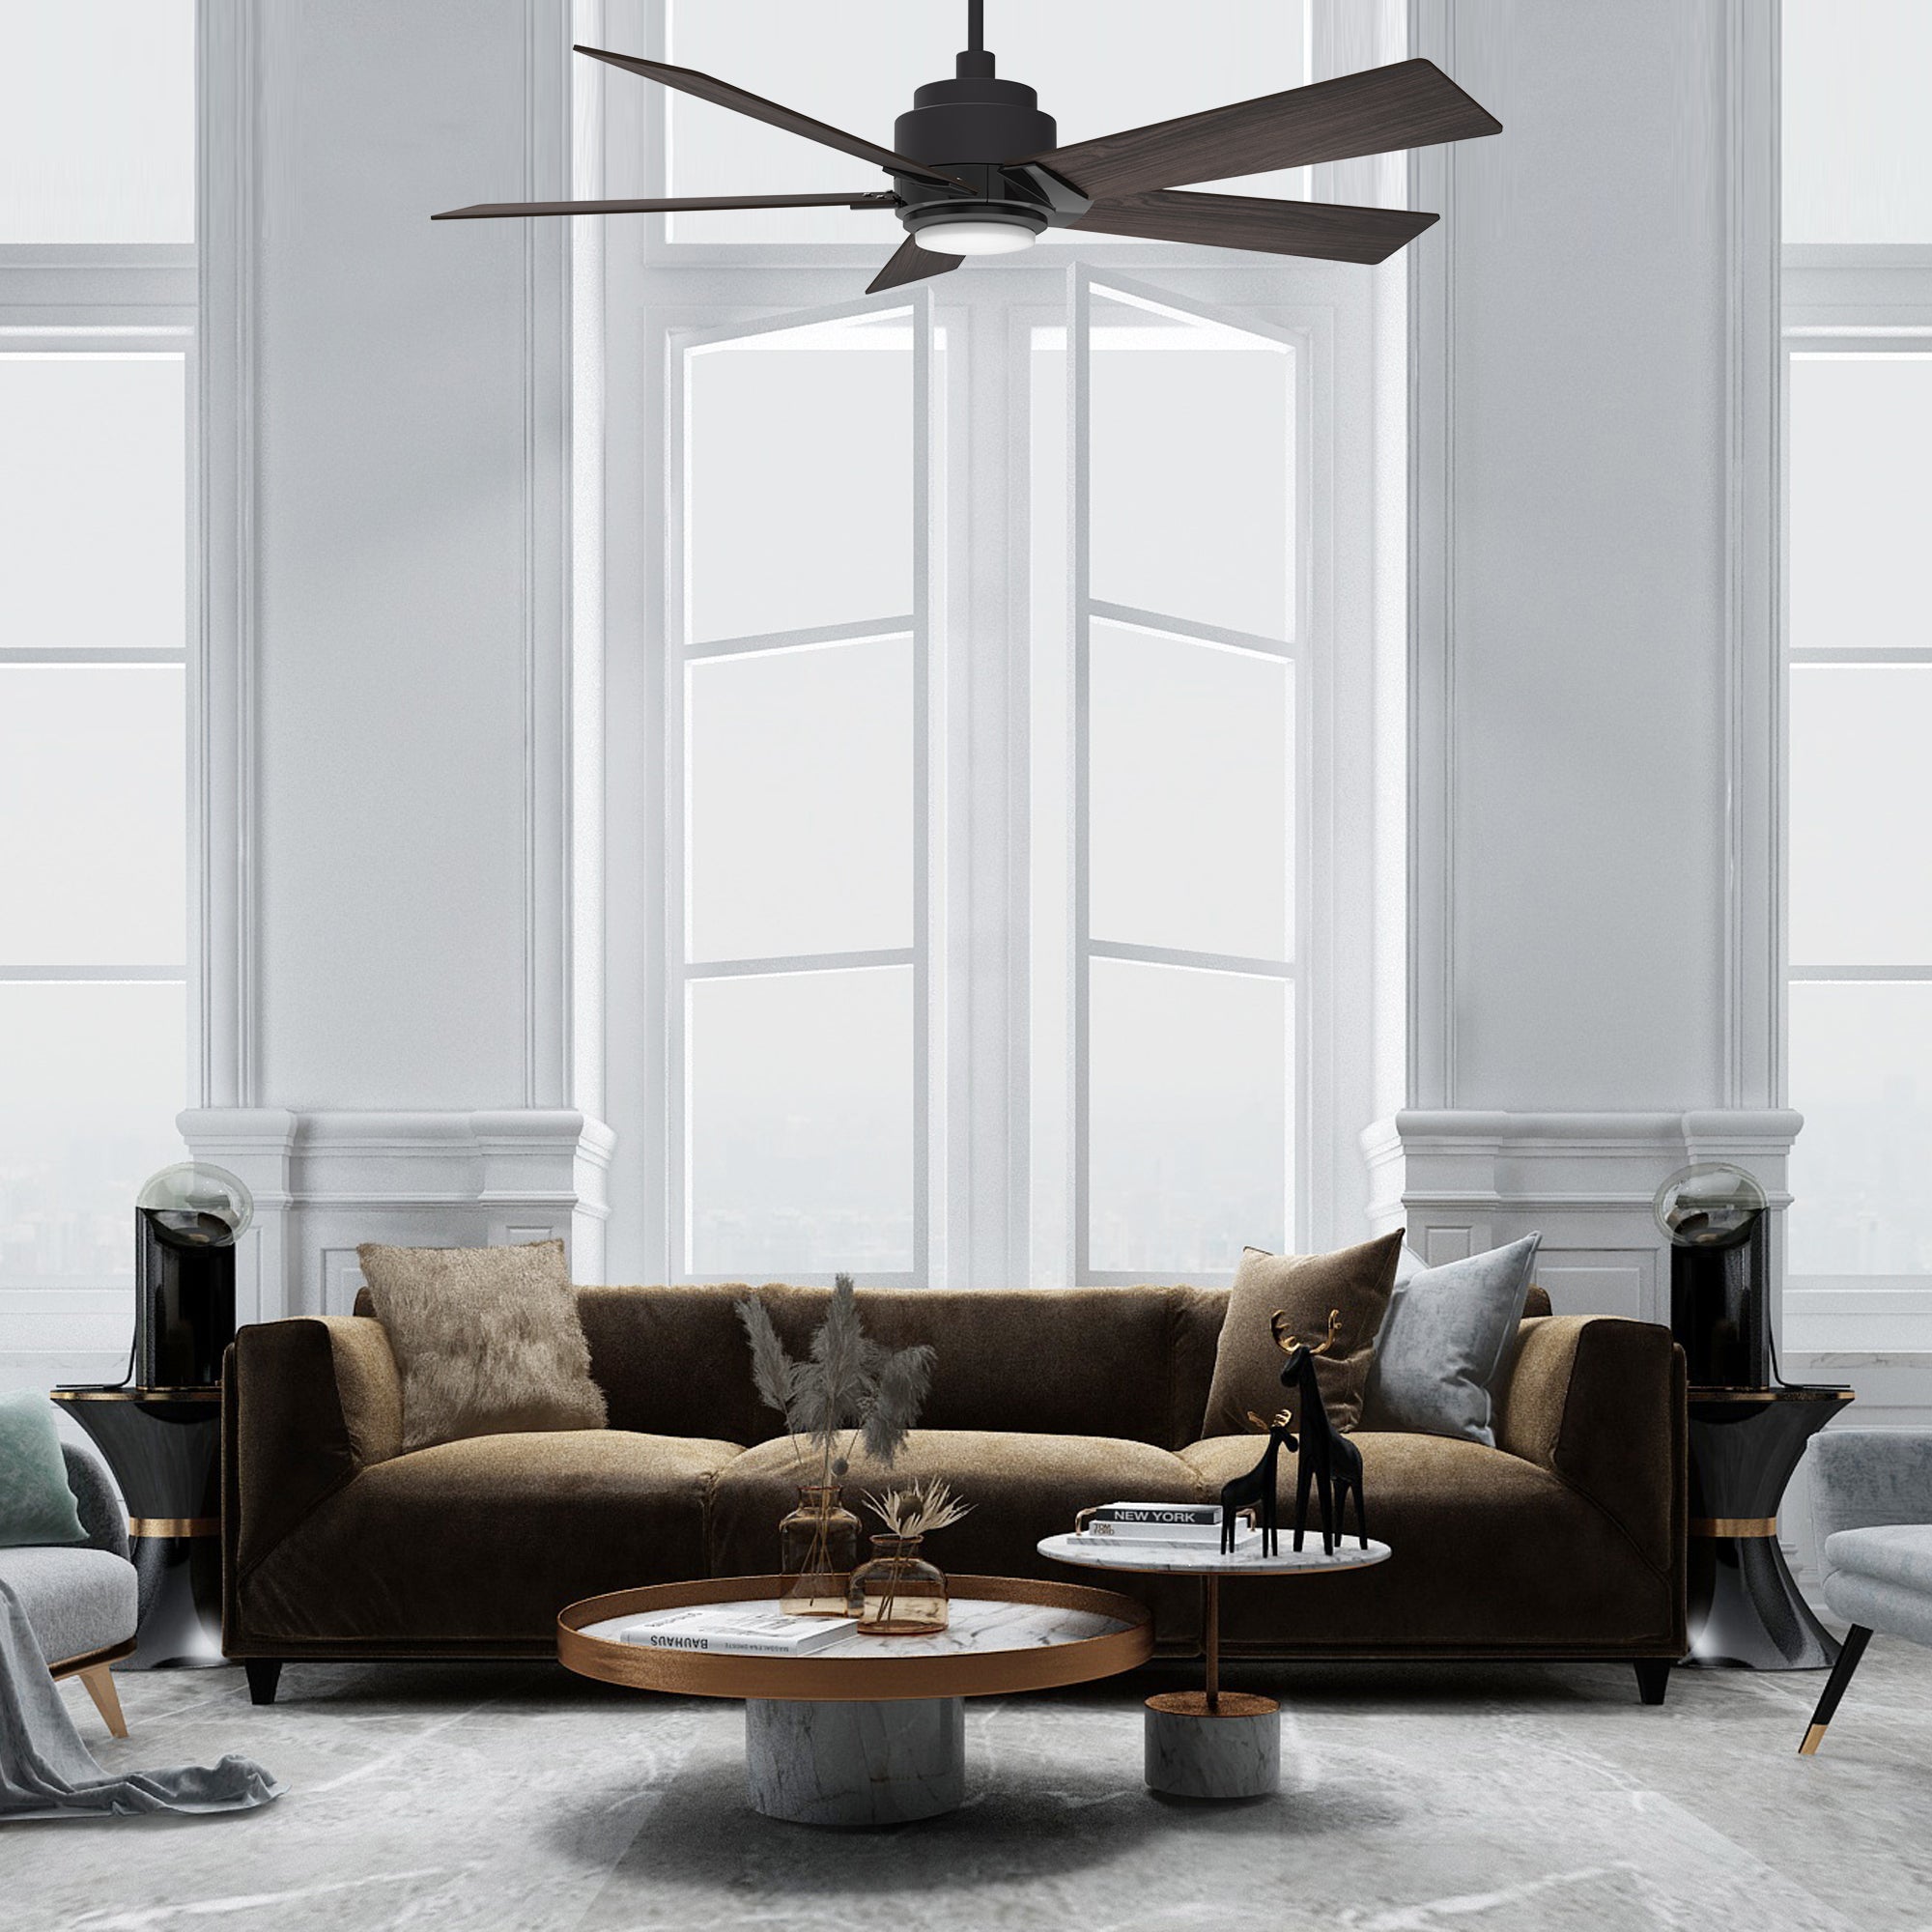 ASPEN outdoor ceiling fan with dimmable LED light kit, mounting in a modern room. 